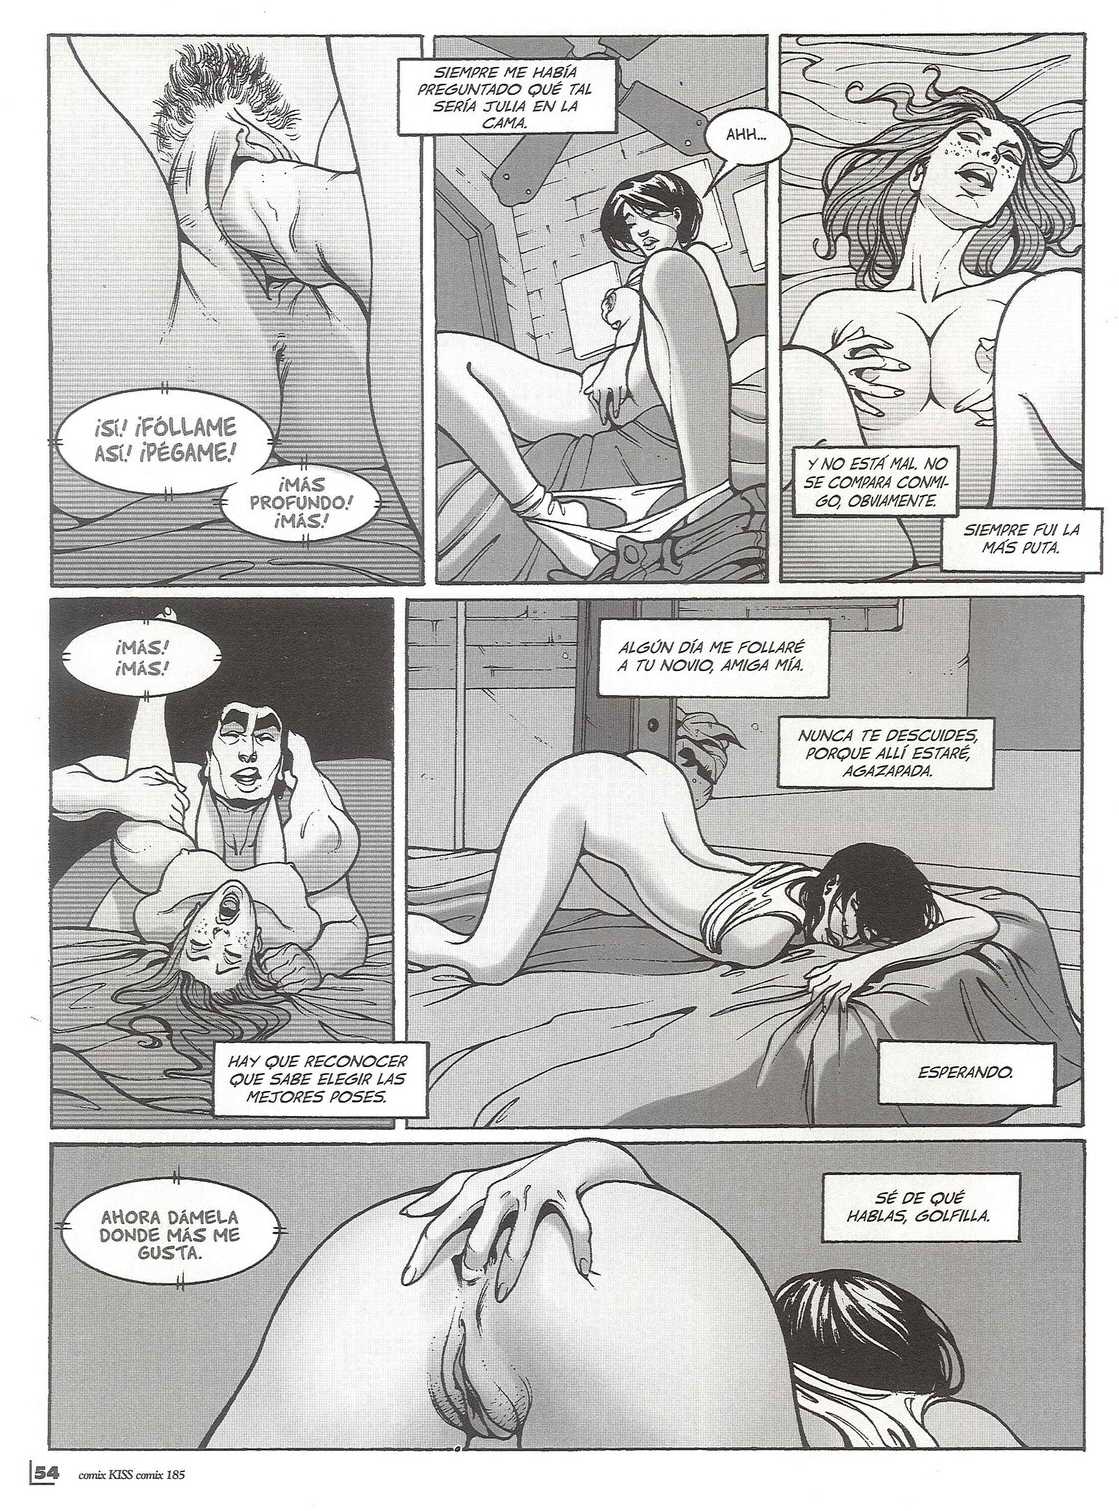 Kiss comix 185 image number 53